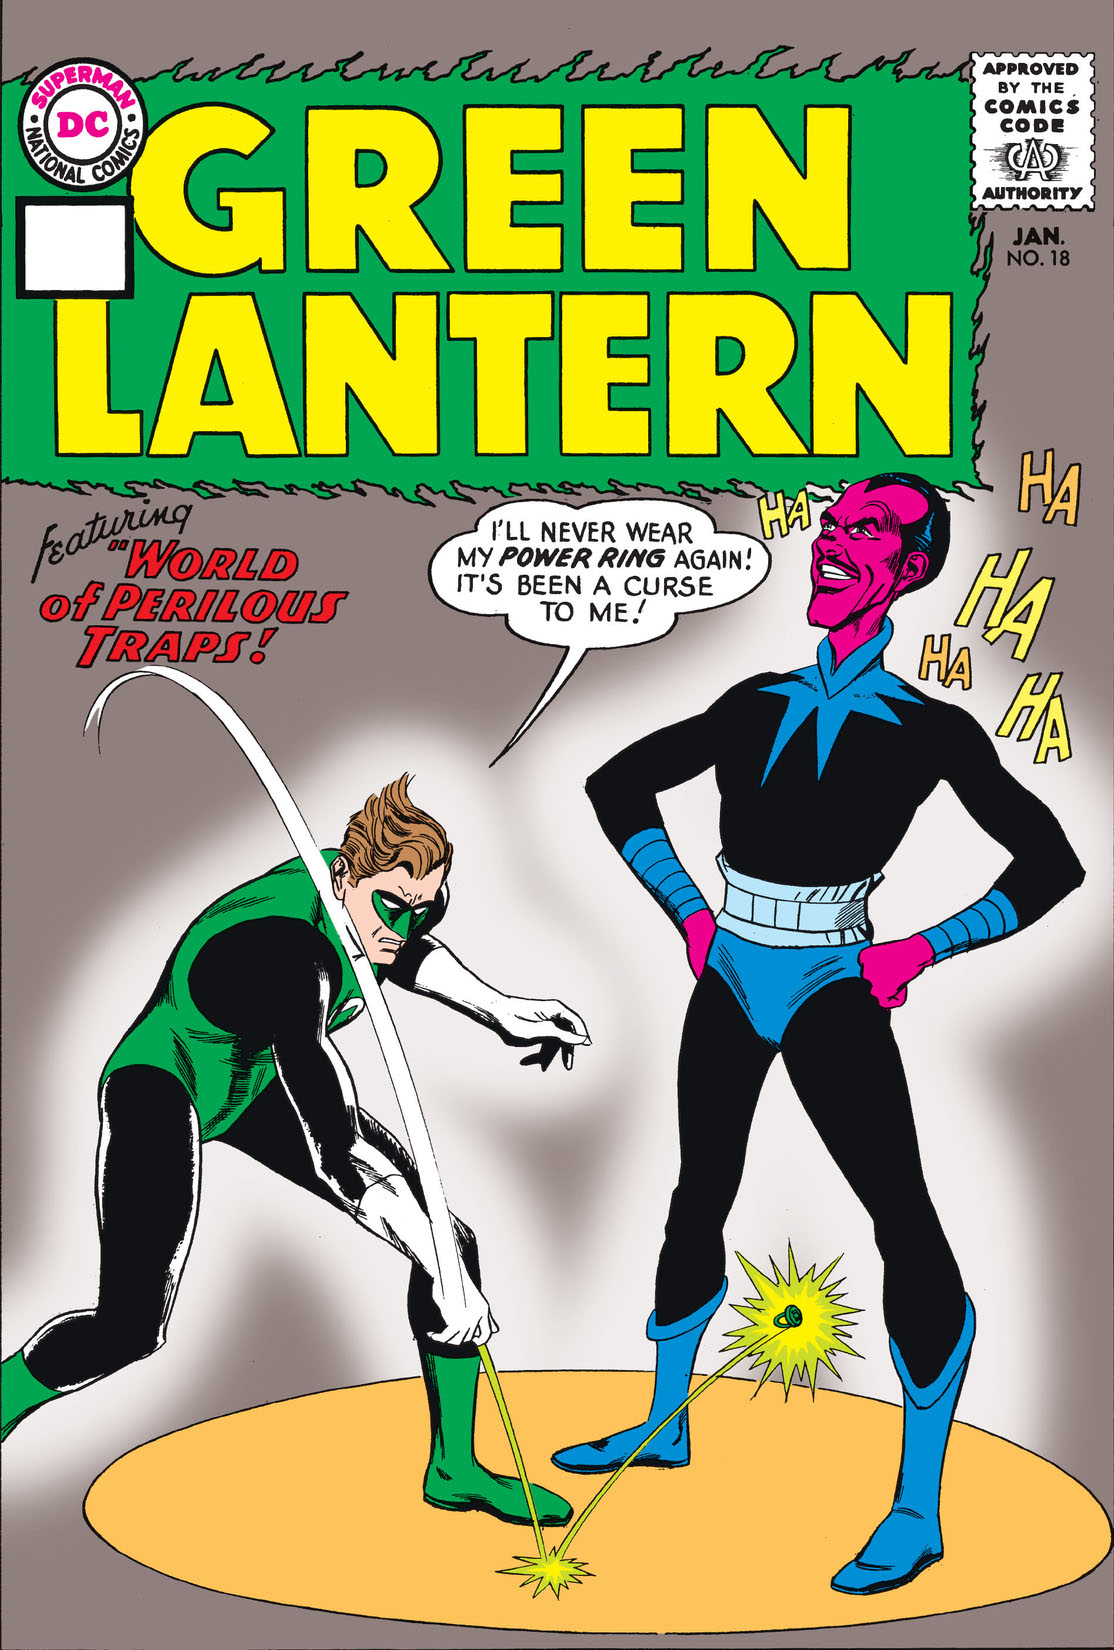 Green Lantern (1960-) #18 preview images